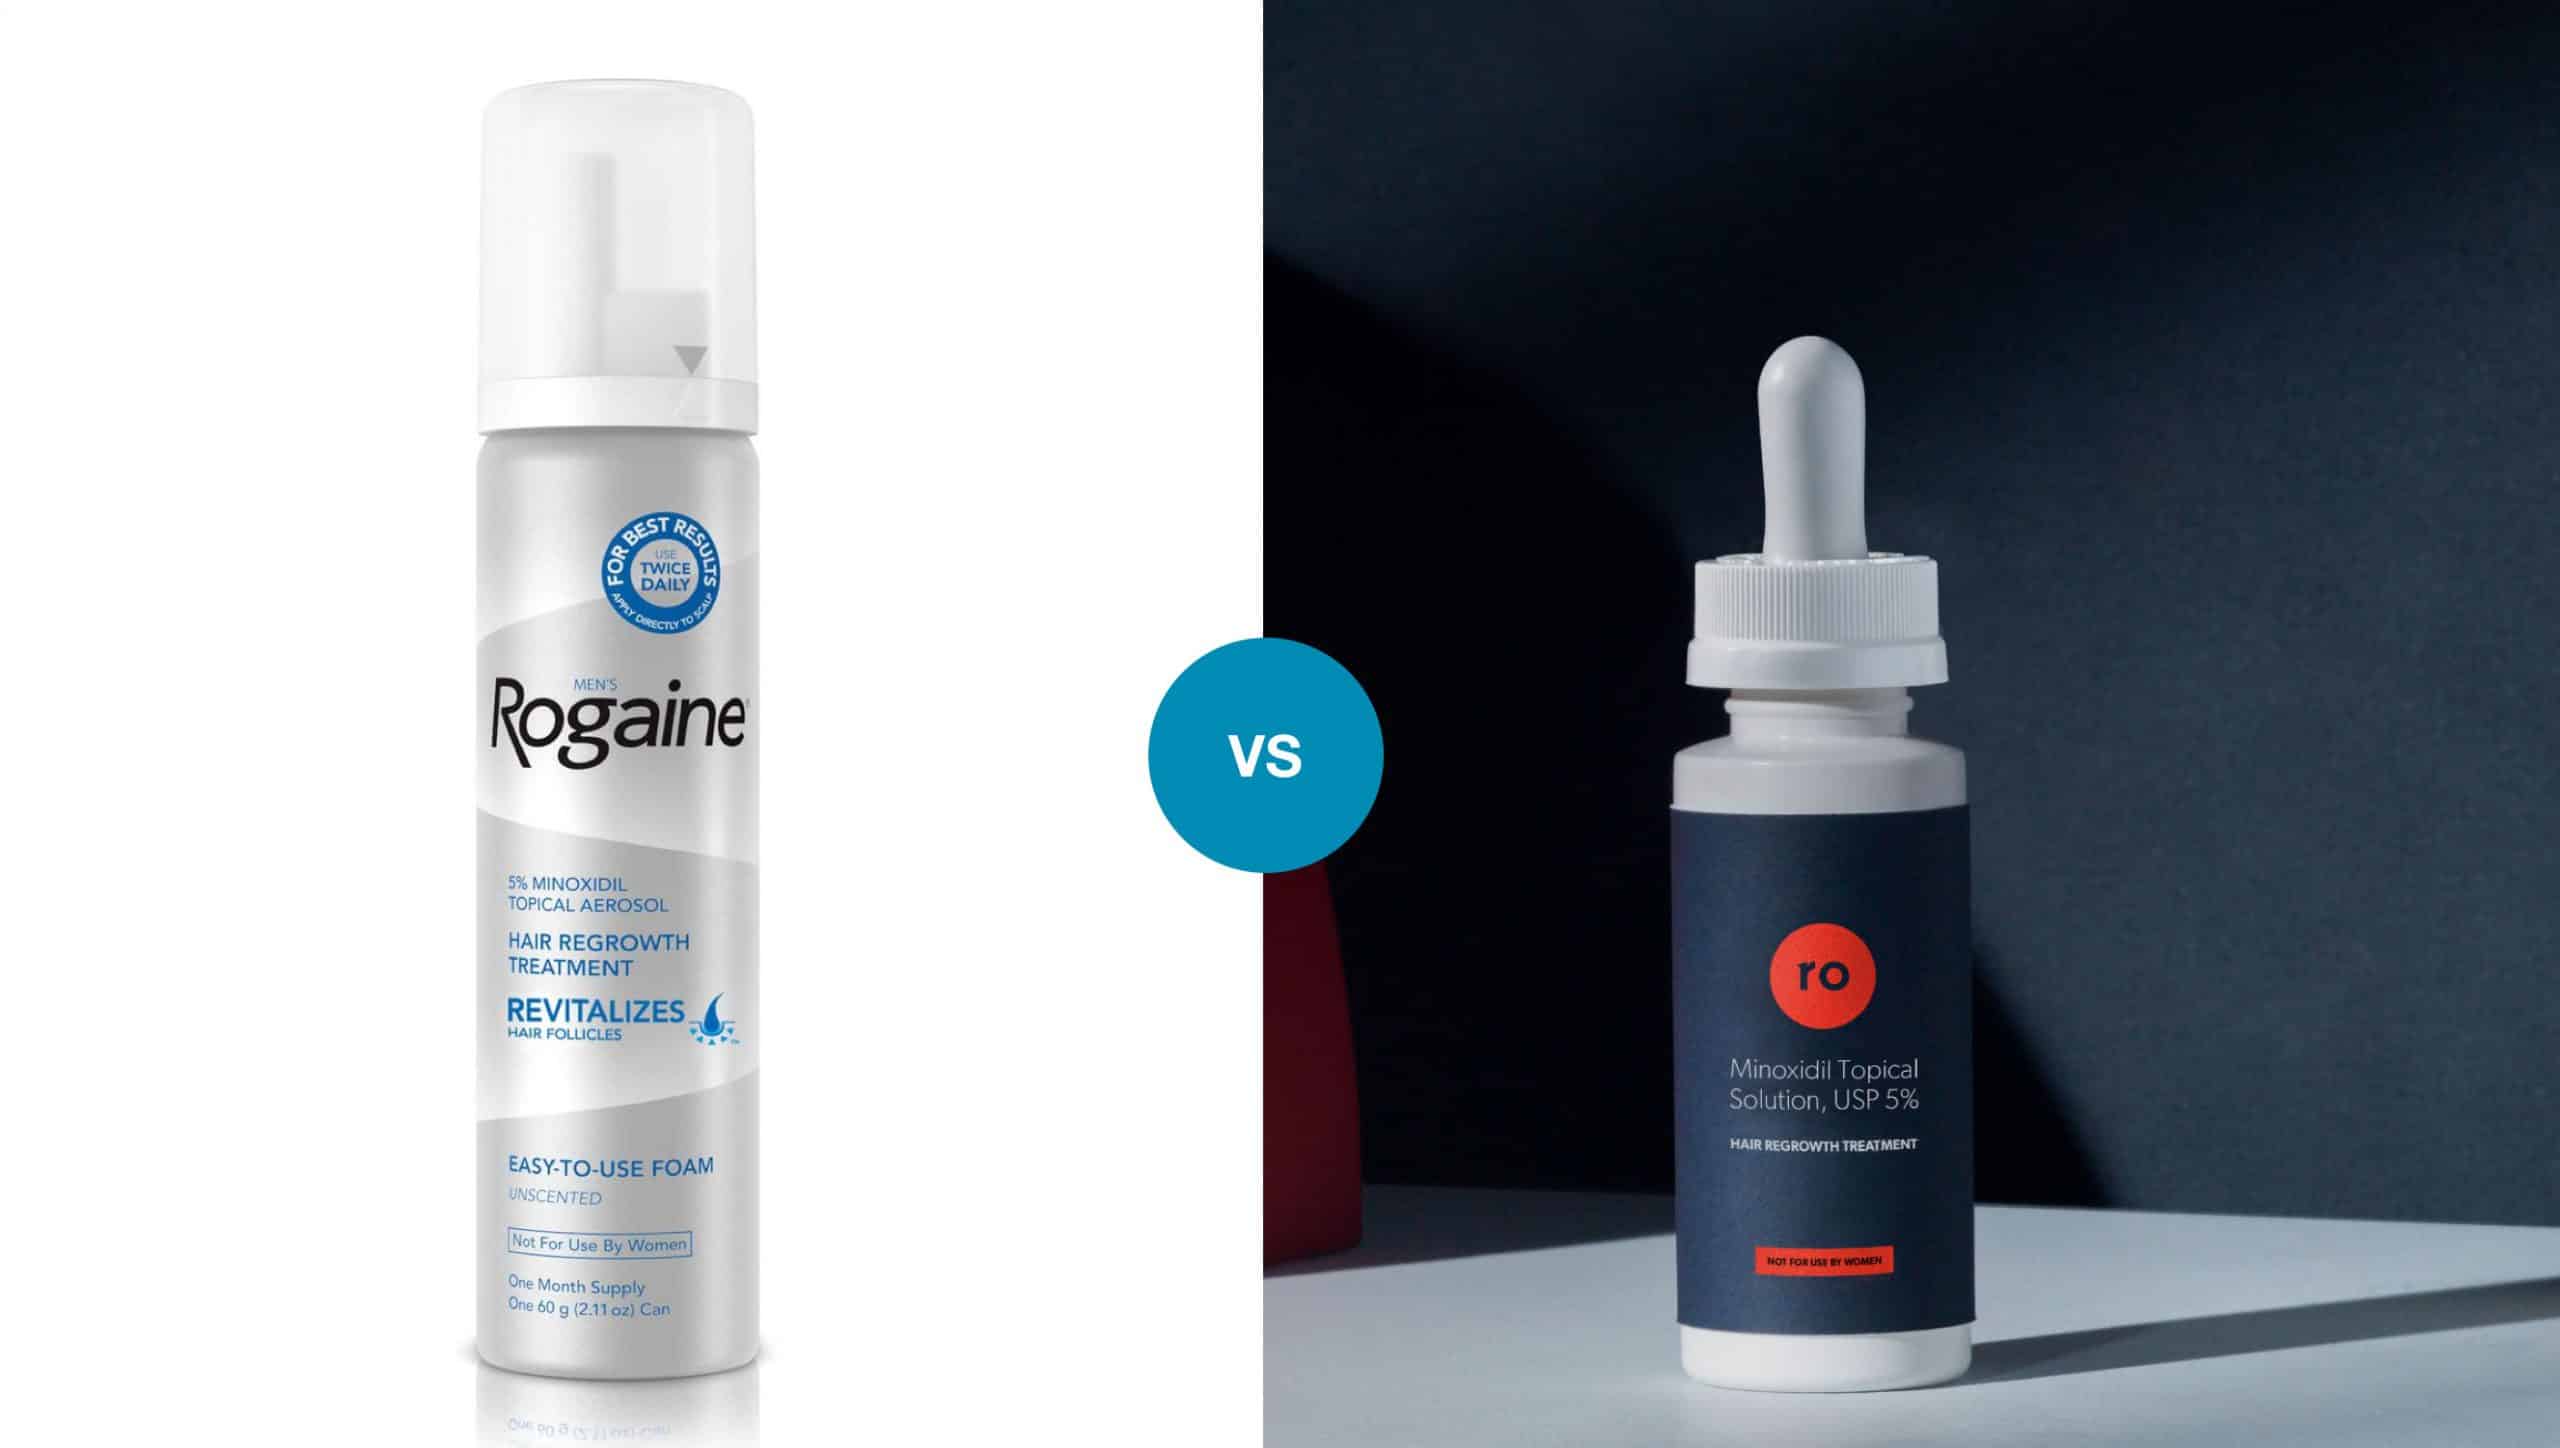 Roman vs Rogaine: Which Has the Best Topical Hair Loss Treatment? - Fin vs  Fin